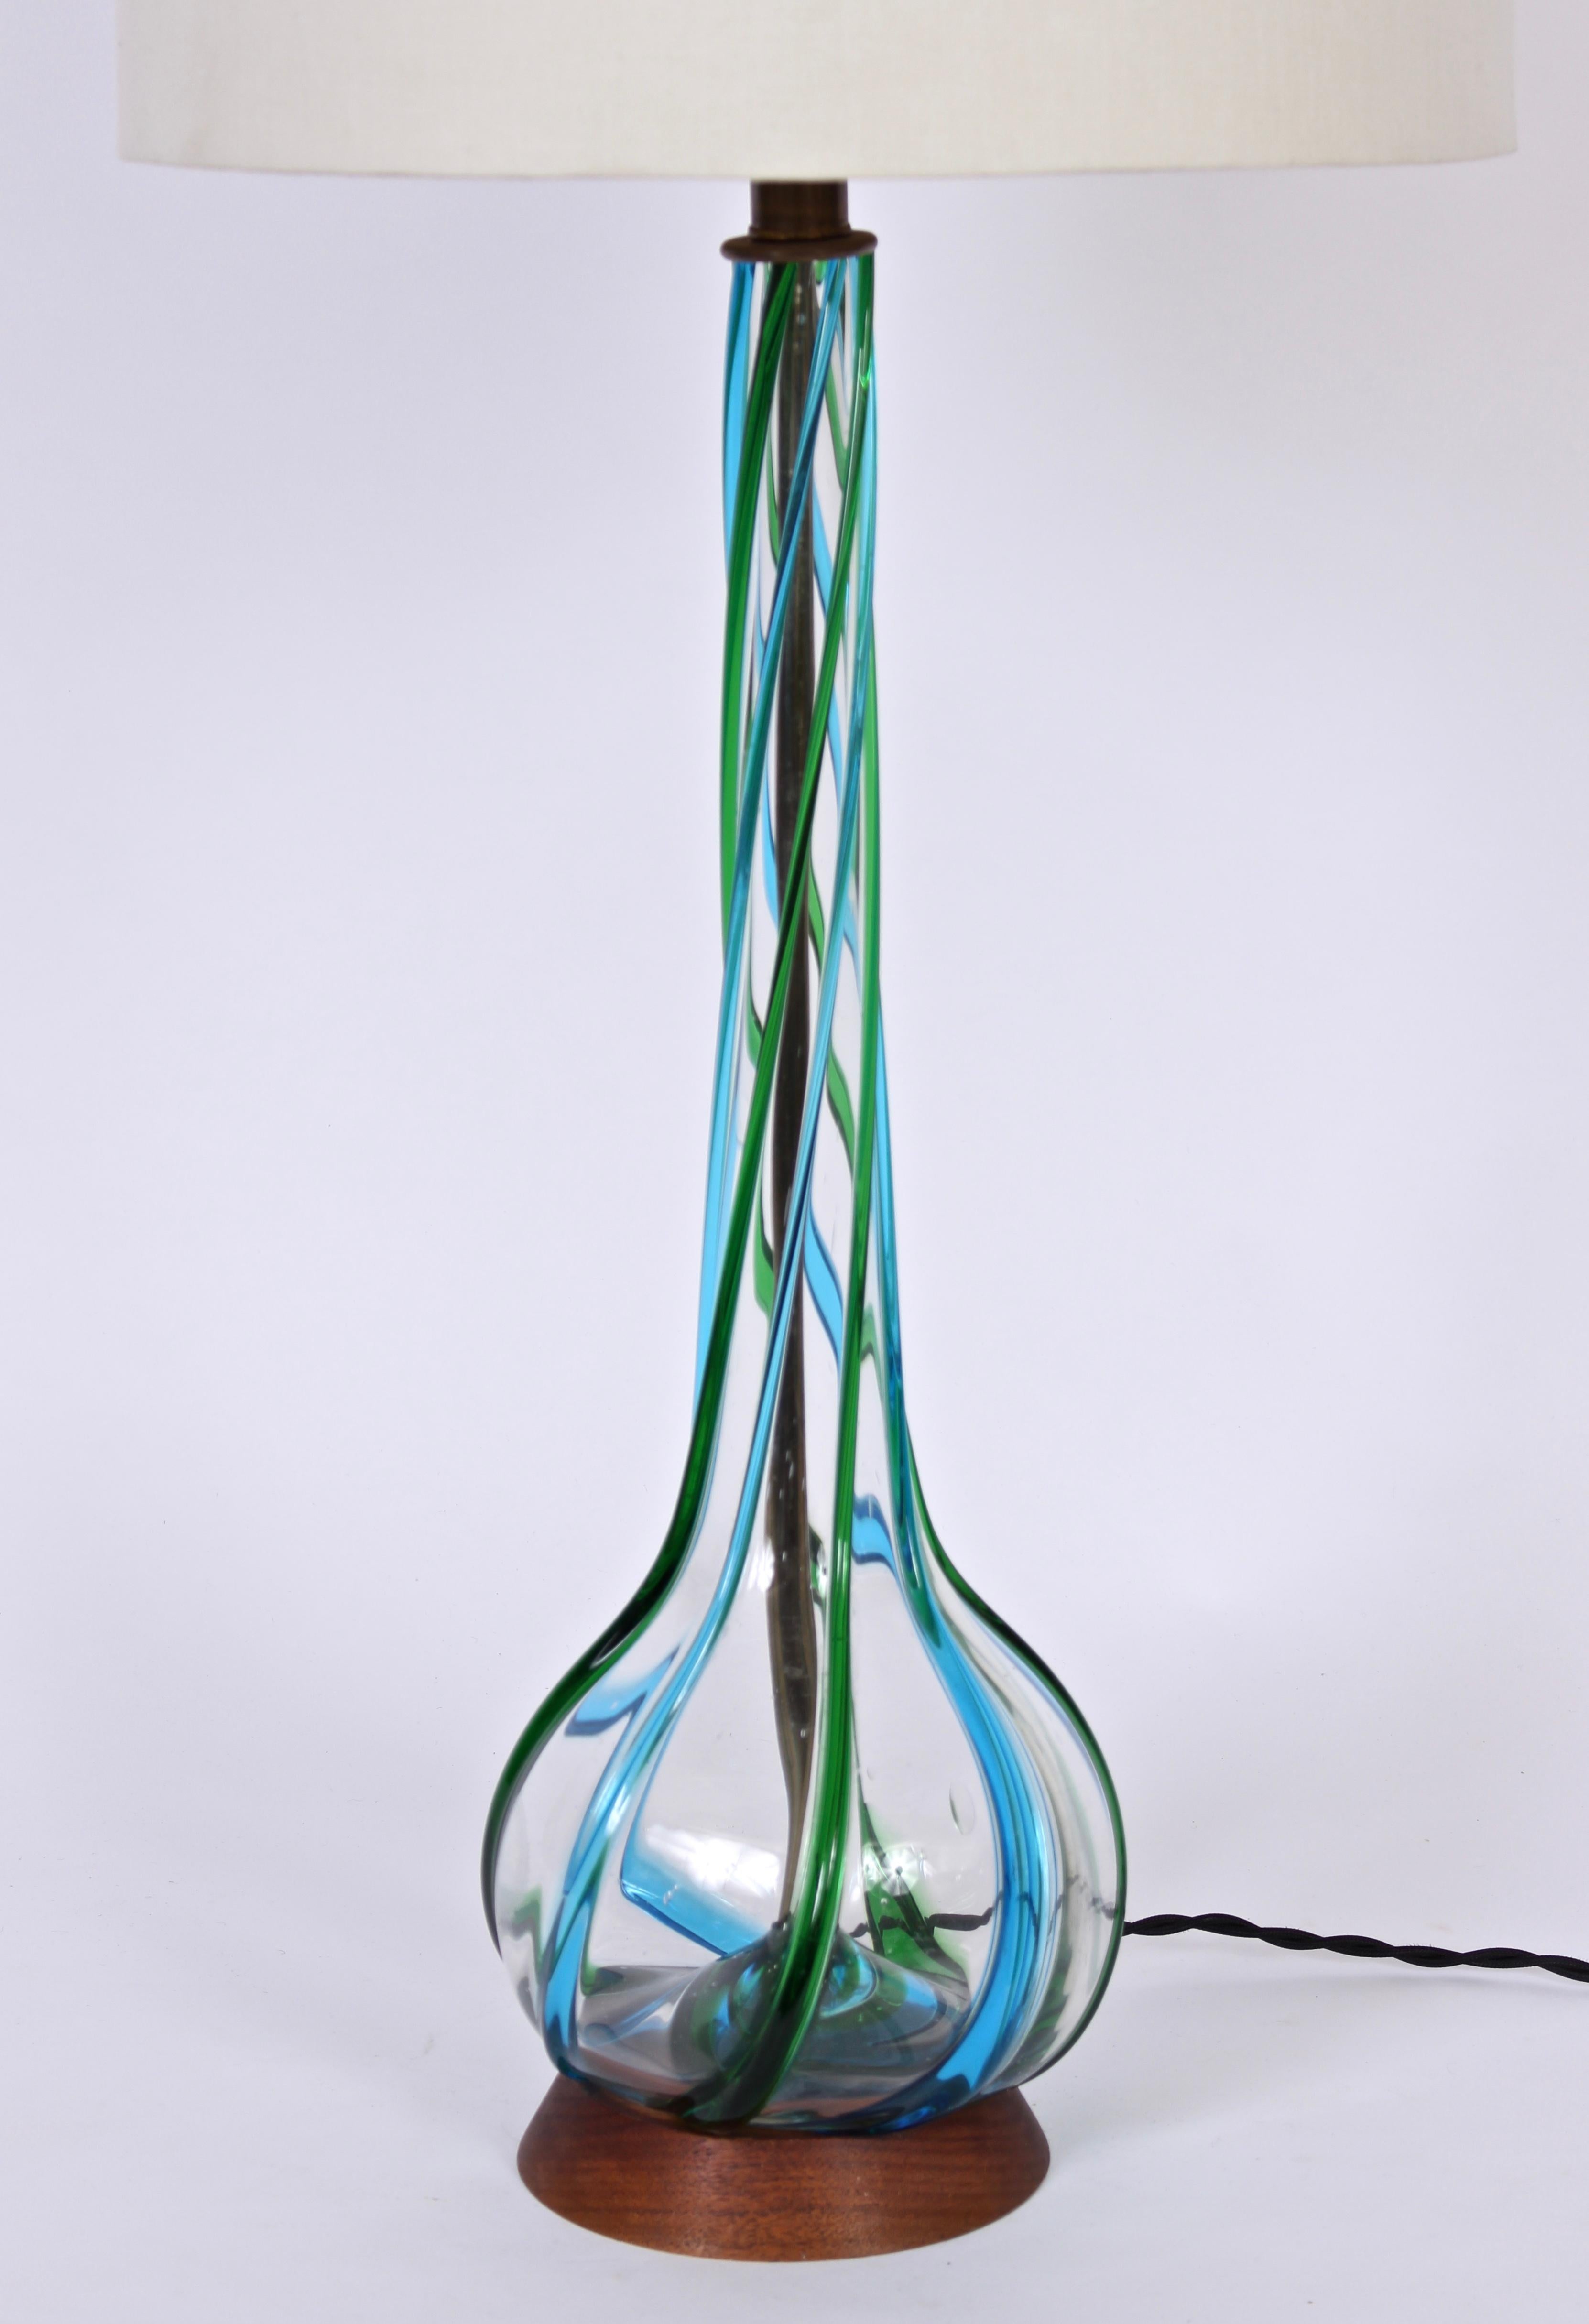 Substantial transparent Murano glass table lamp with applied ribbon relief in peacock blue and green. 35 H to top of finial with harps in place. 26 H to top of socket. Glass 21 H. Shades shown for display only (13 H x 13 D x 14 D). Sculptural.